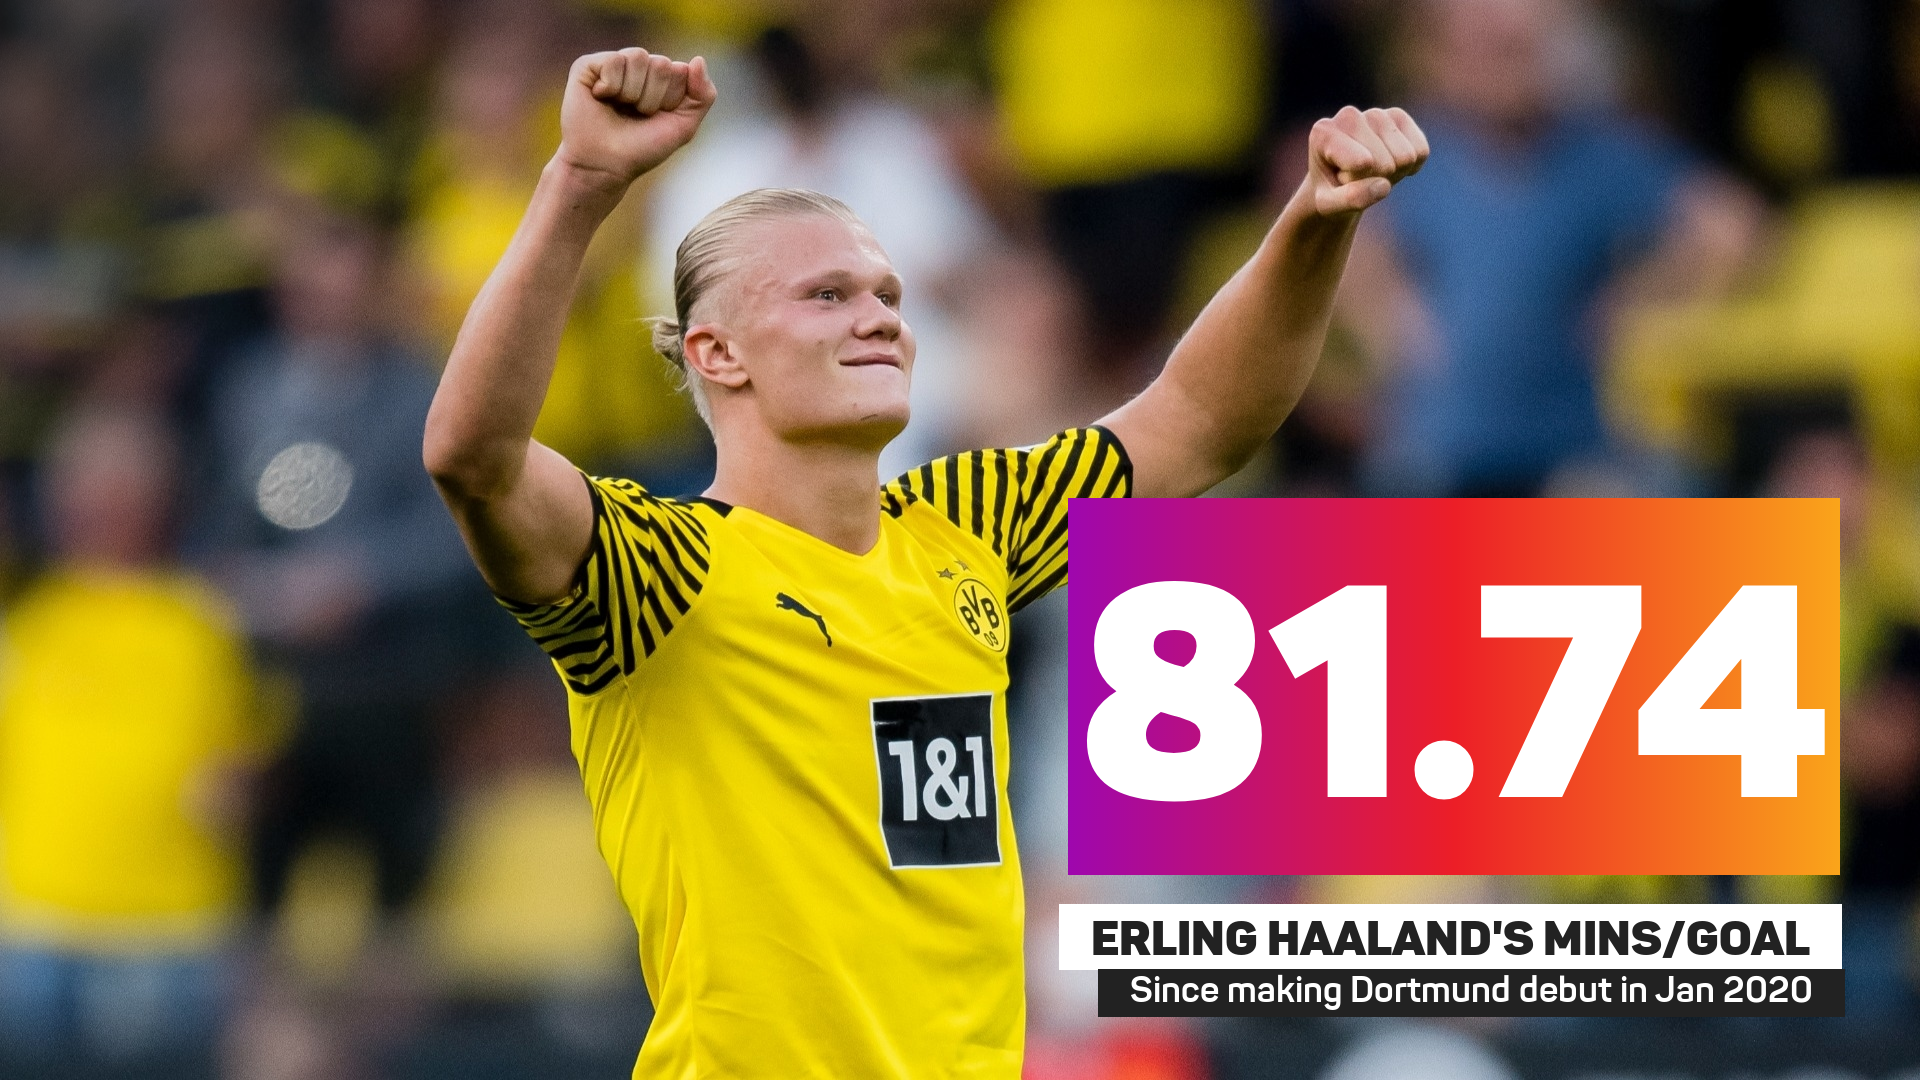 Erling Haaland has averaged a goal every 81.74 minutes for Borussia Dortmund